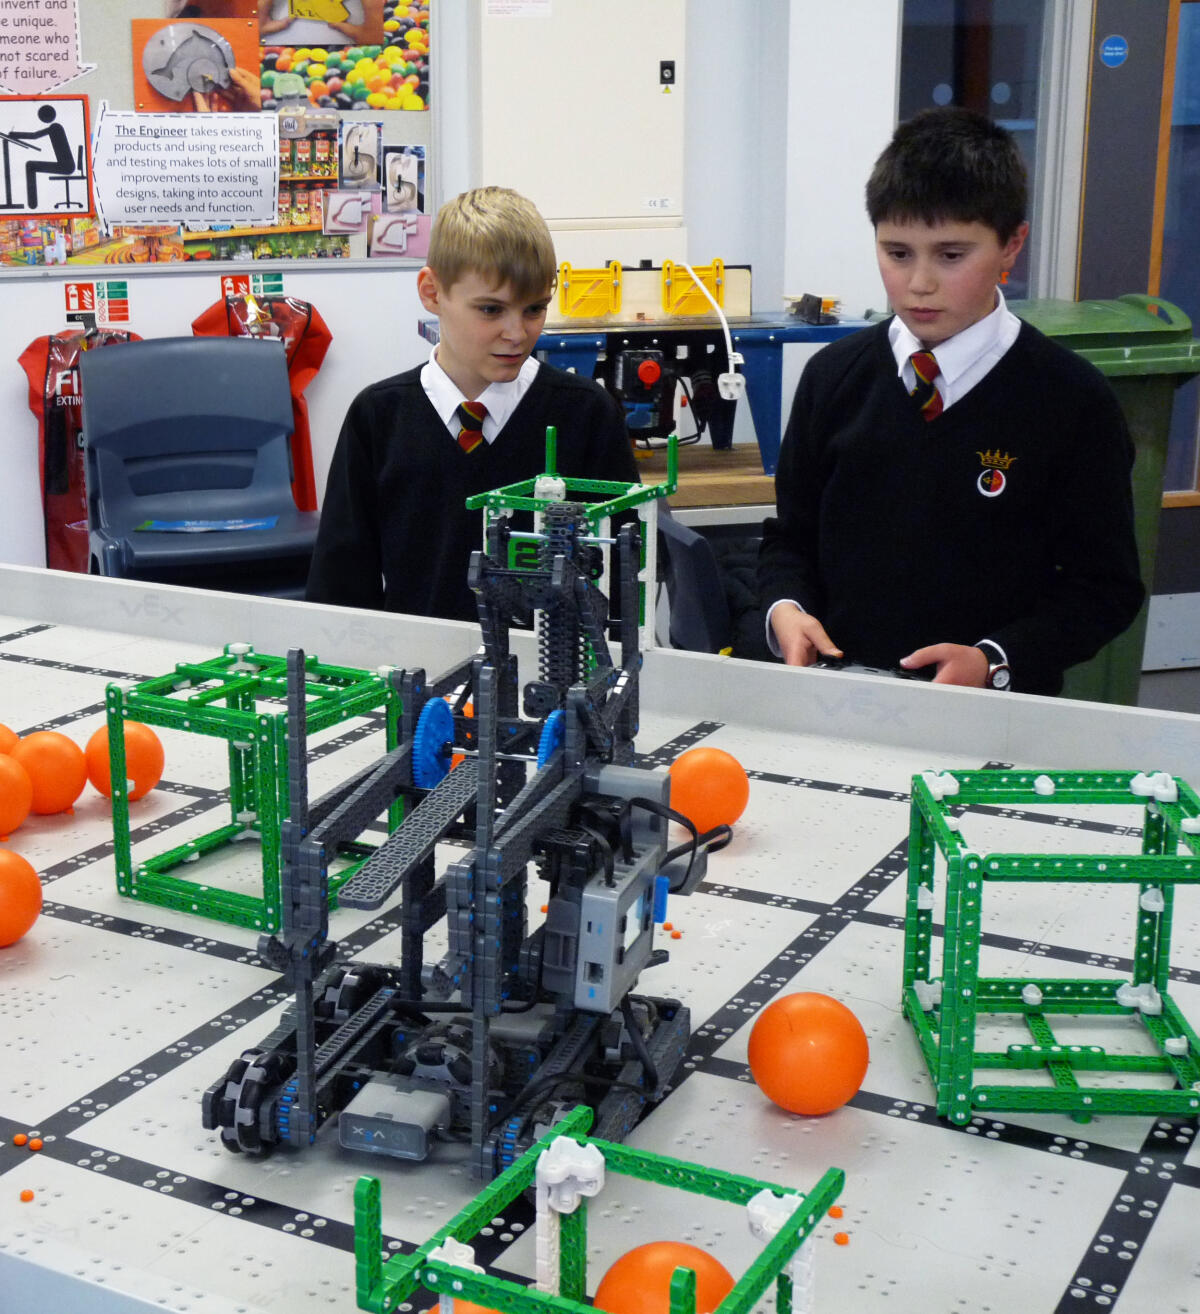 Some heats in the Vex IQ Challenge involve driving the robot to pick up objects and place them in point-scoring areas.